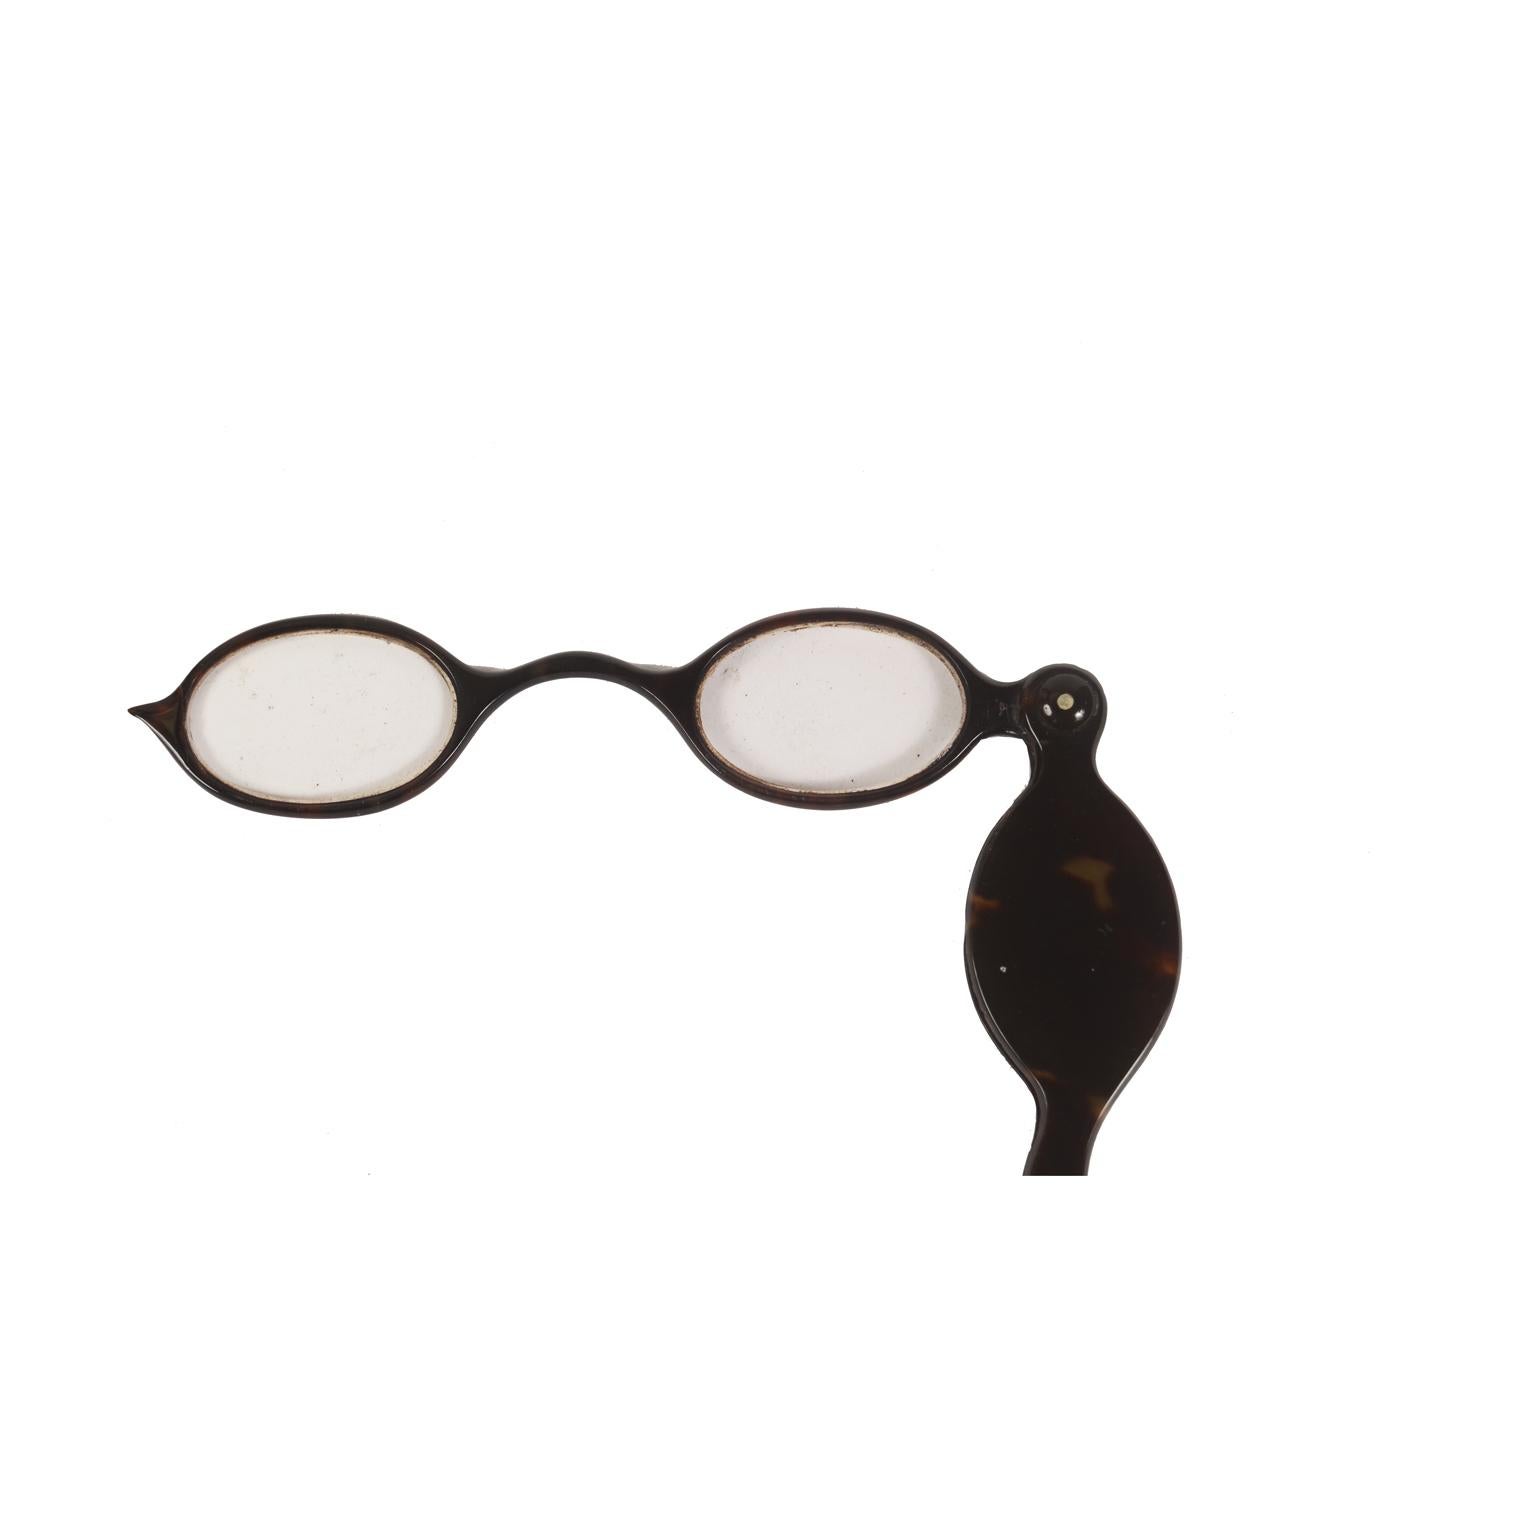 Fassamano (from the French face-a-main) eyeglasses with handle that turns into a case shaped like the lenses; dark tortoise eyeglasses, oval lenses that when not used fall back inside the handle. French manufacture of the second half of the 19th